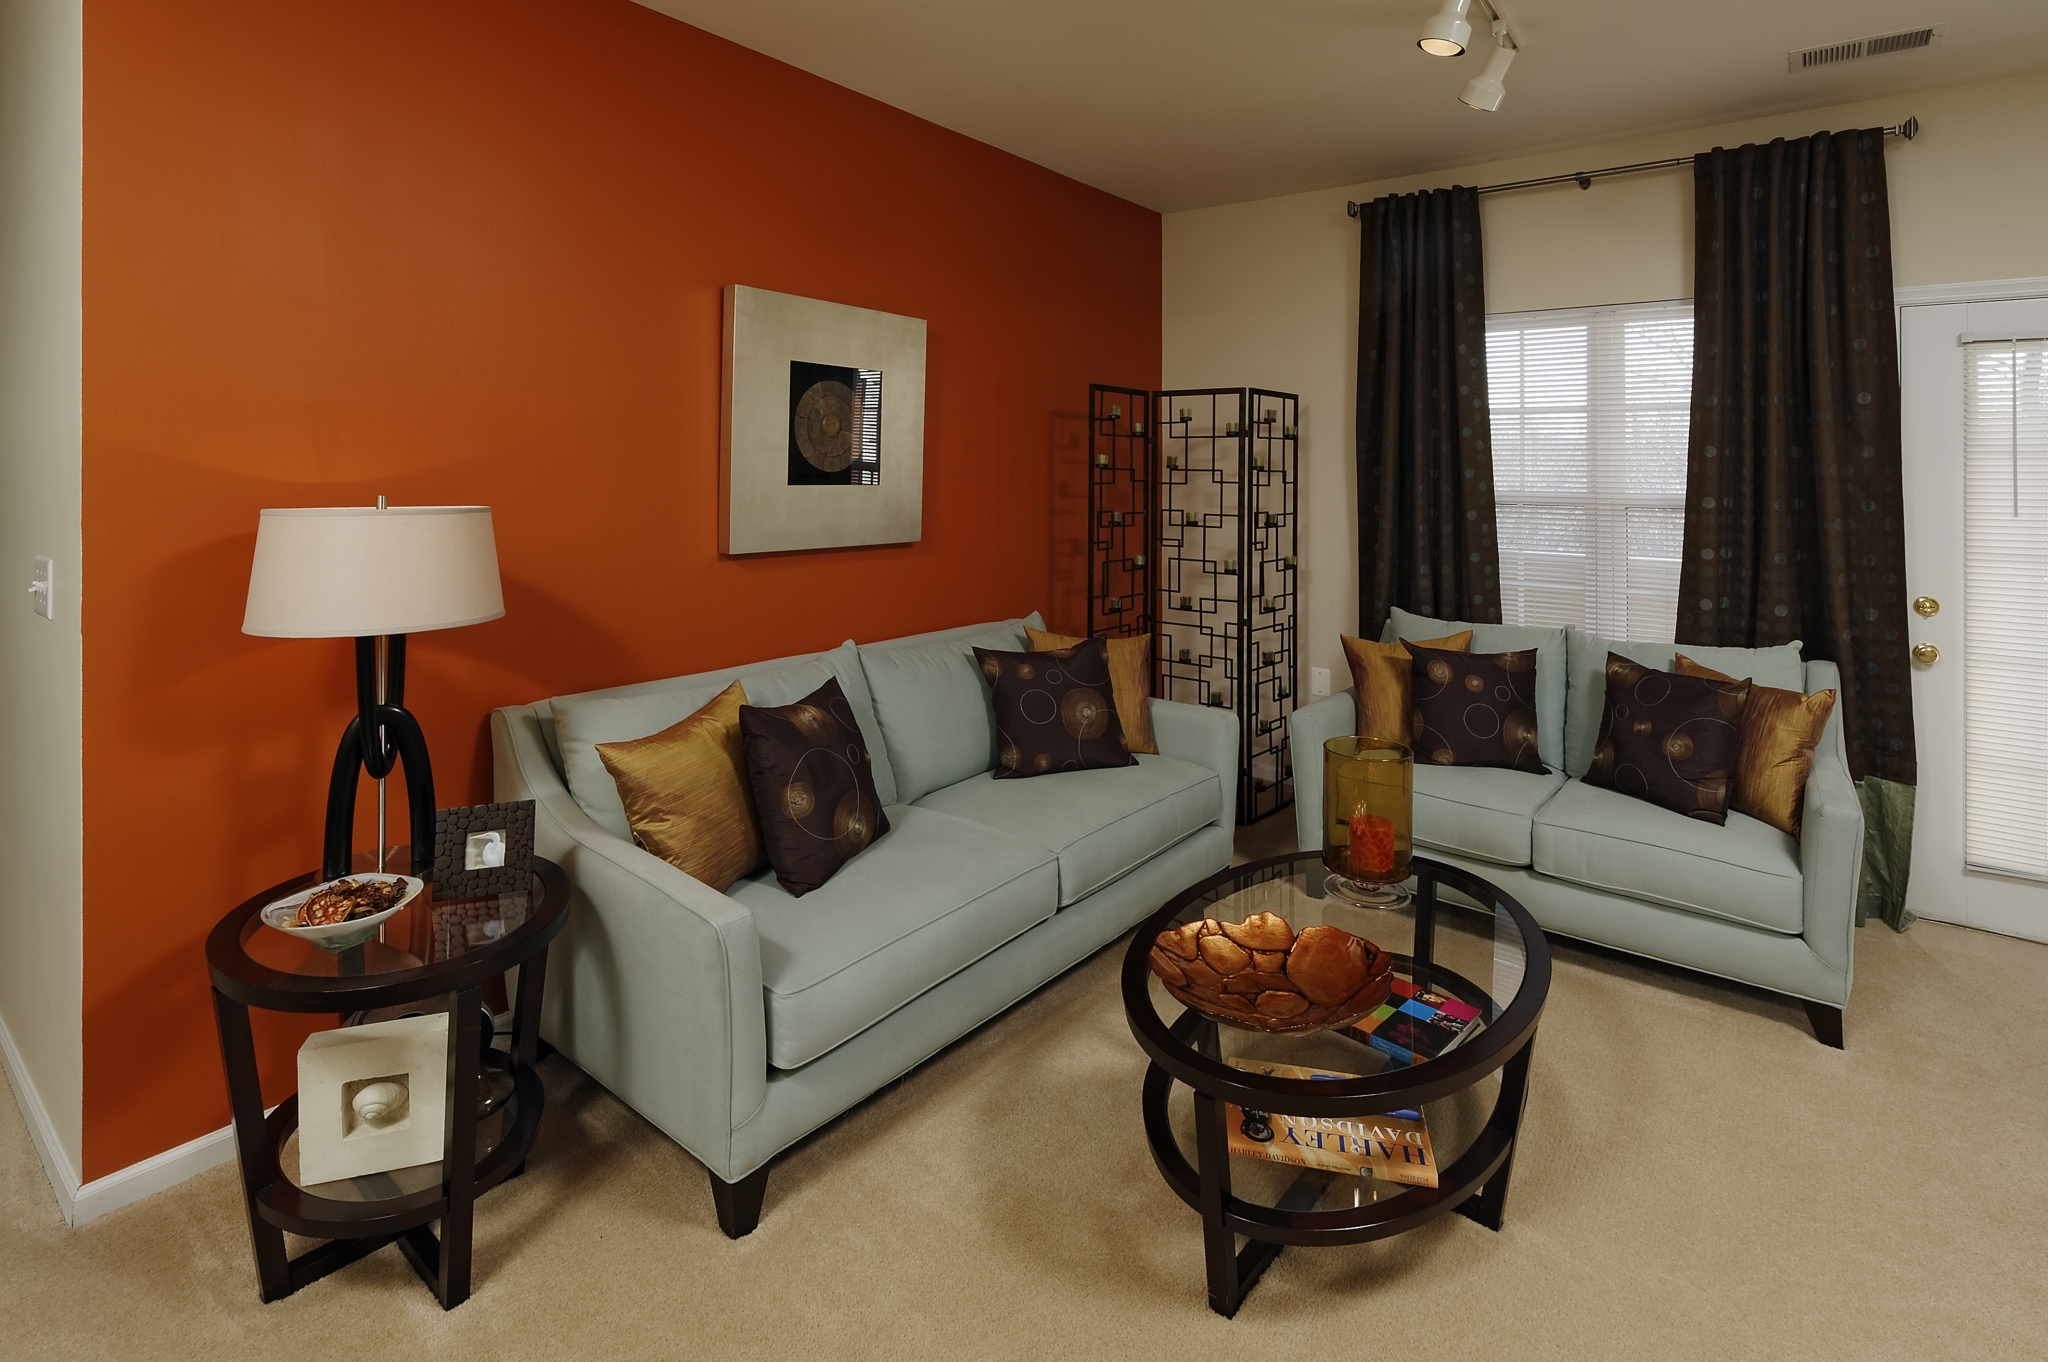 Design the Living Room In Your Apartment on a Budget With These 5 Tips-image